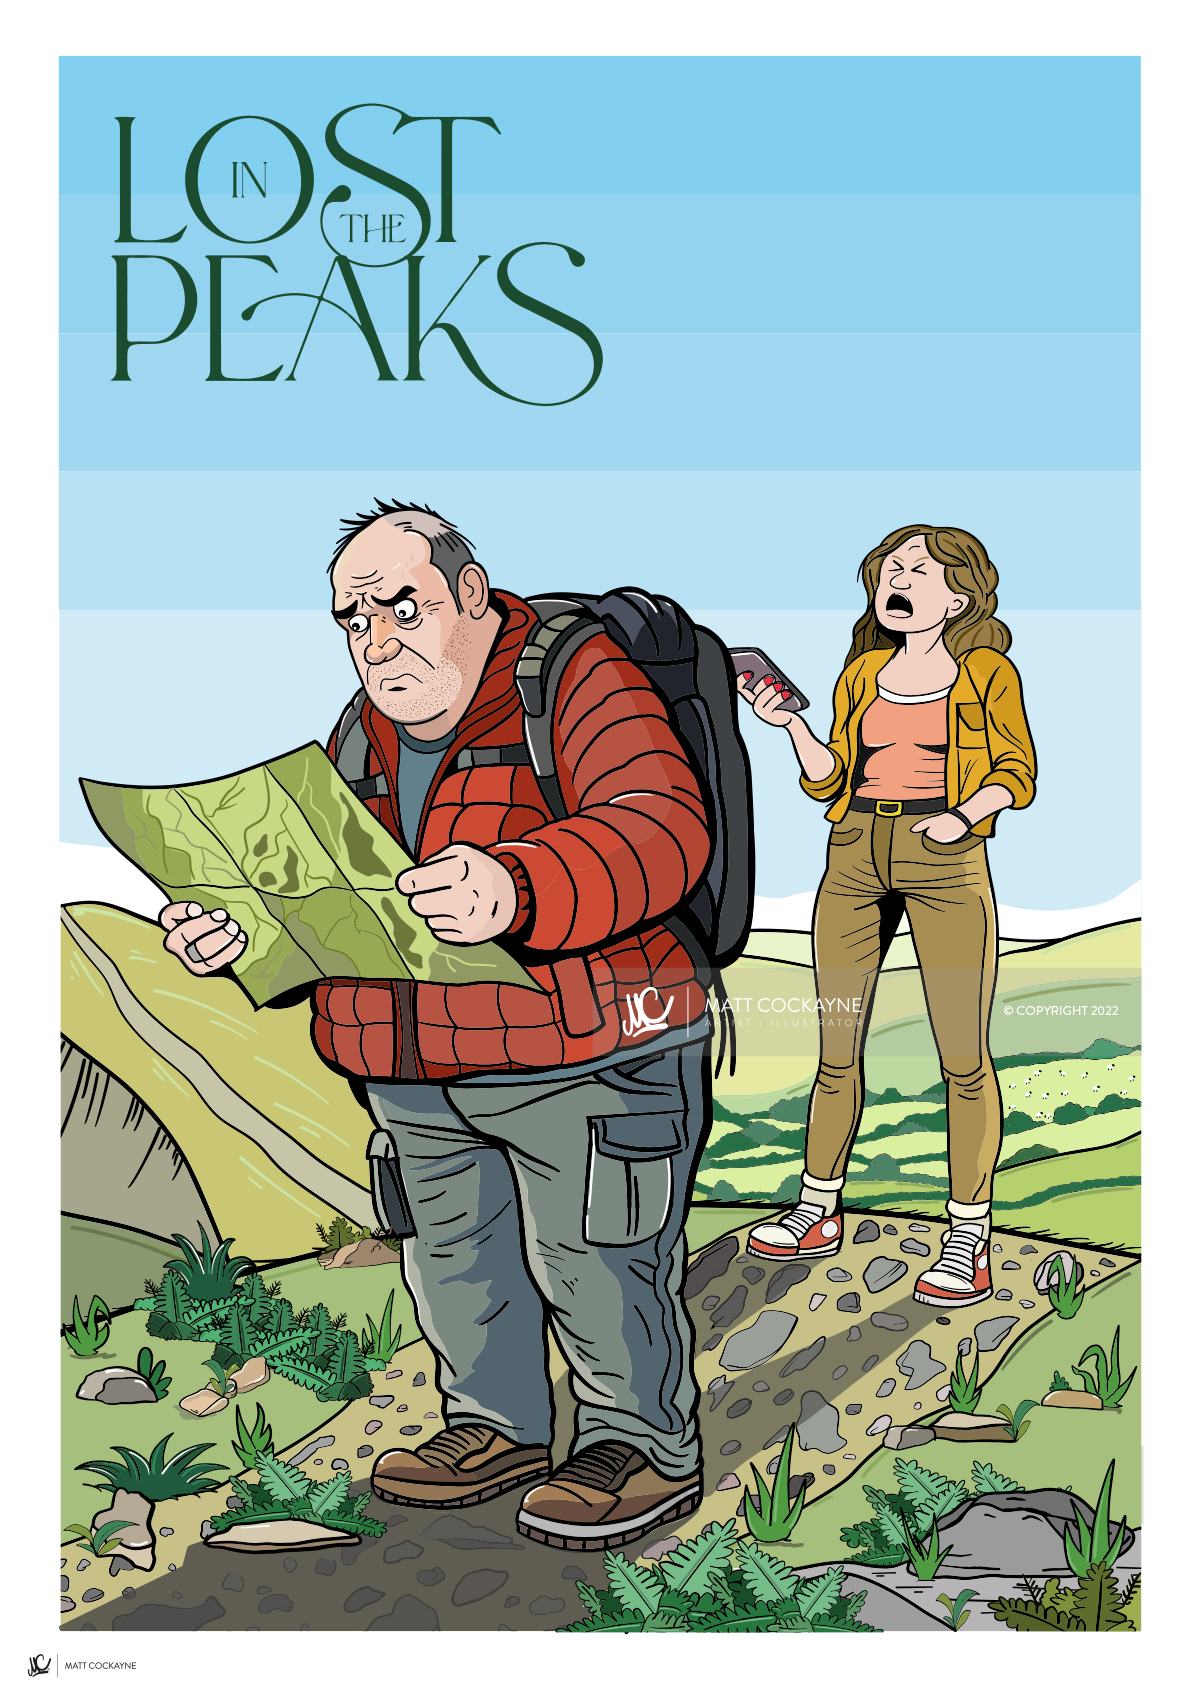 Lost in the Peaks - Peak District Prints - Wall Art - Poster - Print - Canvas - Illustration